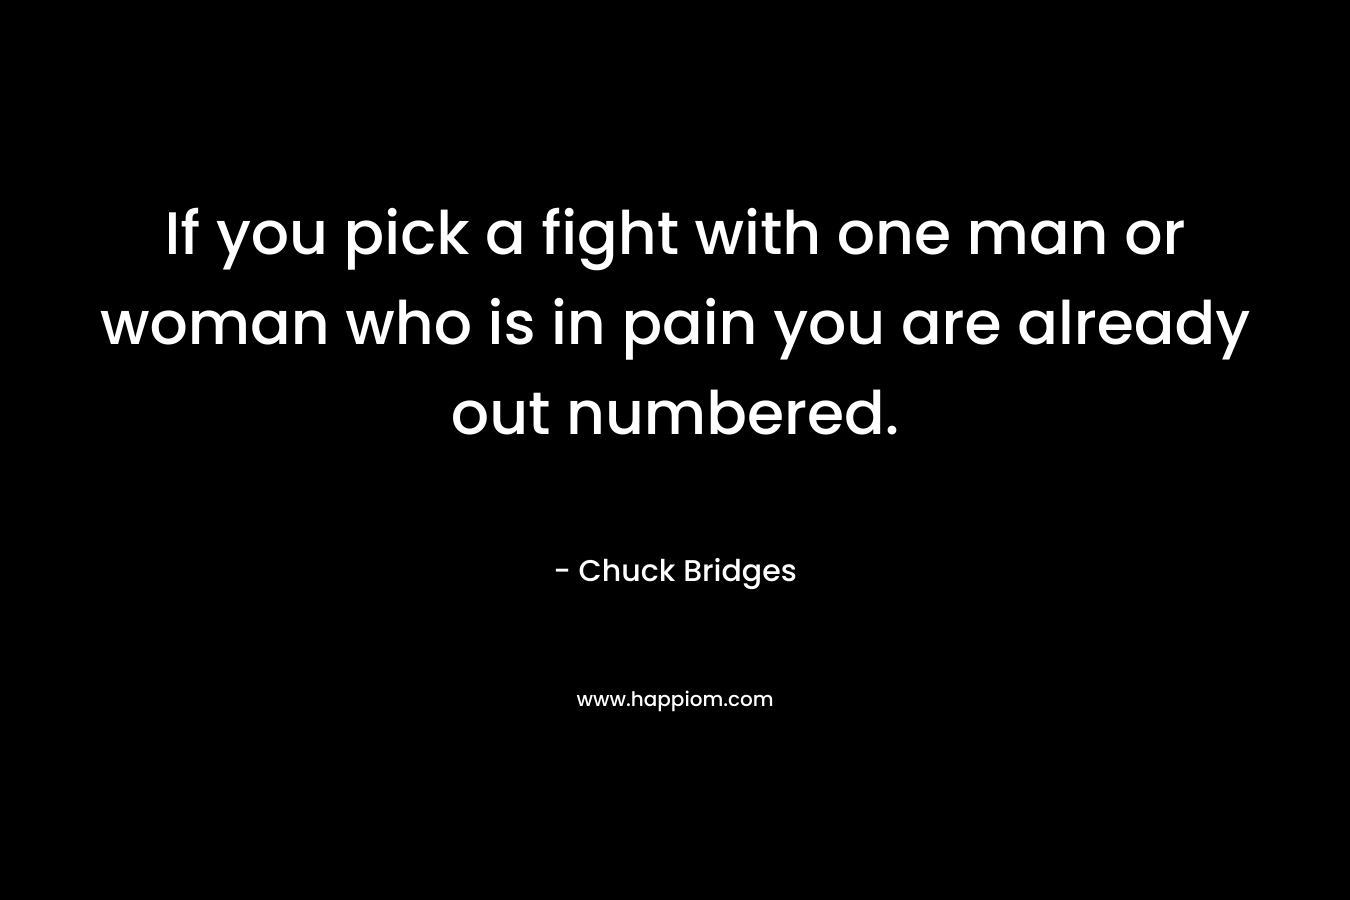 If you pick a fight with one man or woman who is in pain you are already out numbered. – Chuck Bridges